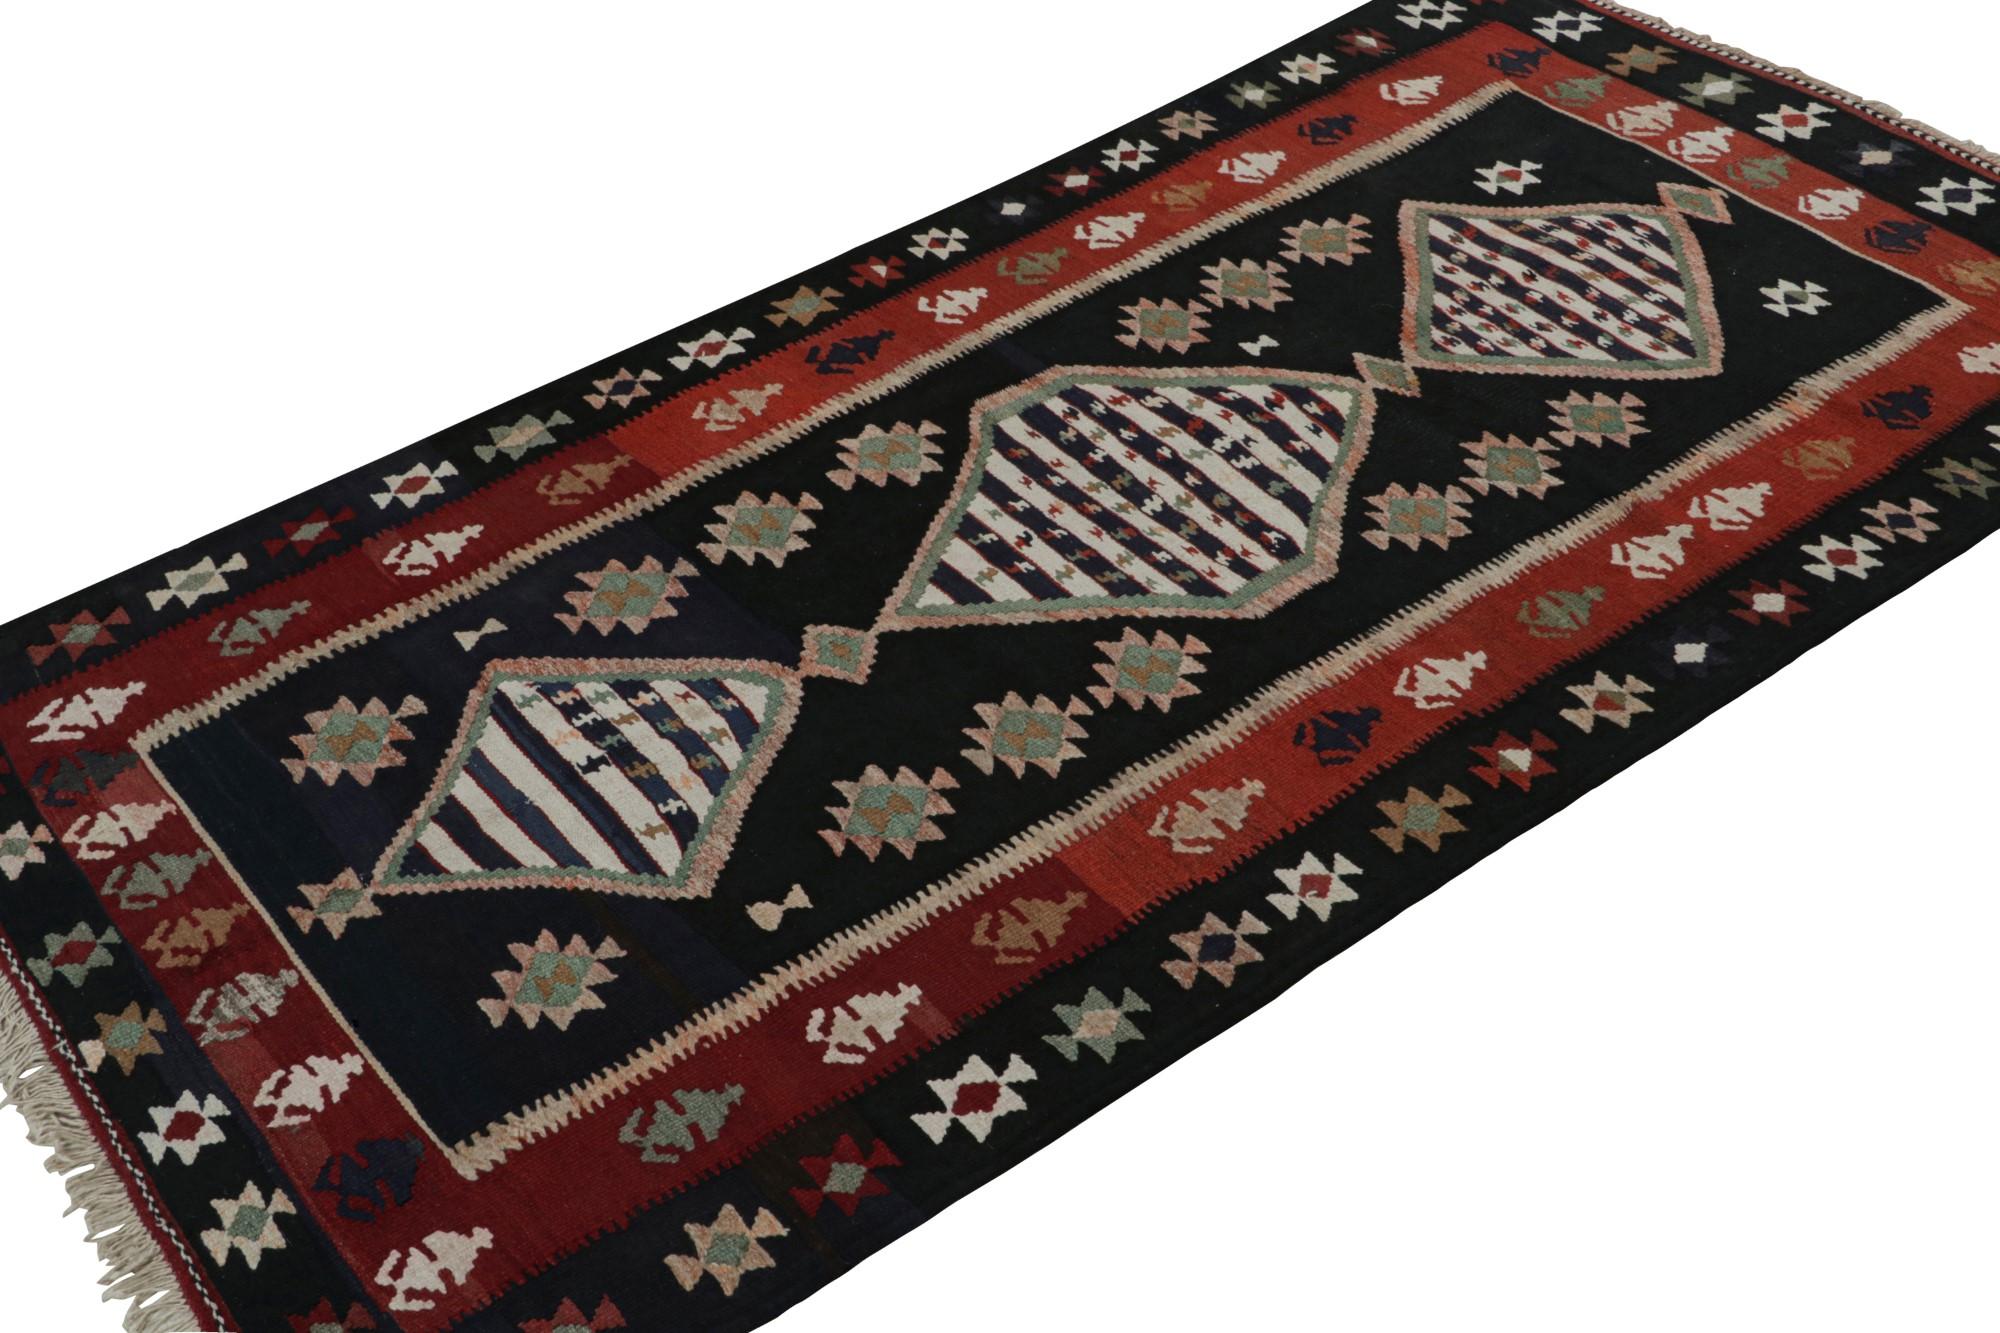 Hand knotted in wool, this 4x7 Afghan tribal kilim represents a new line of tribal carpets in the Modern Classics Collection by Rug & Kilim. Each piece represents the work of women weavers in Afghanistan, preserving the rich tradition of their